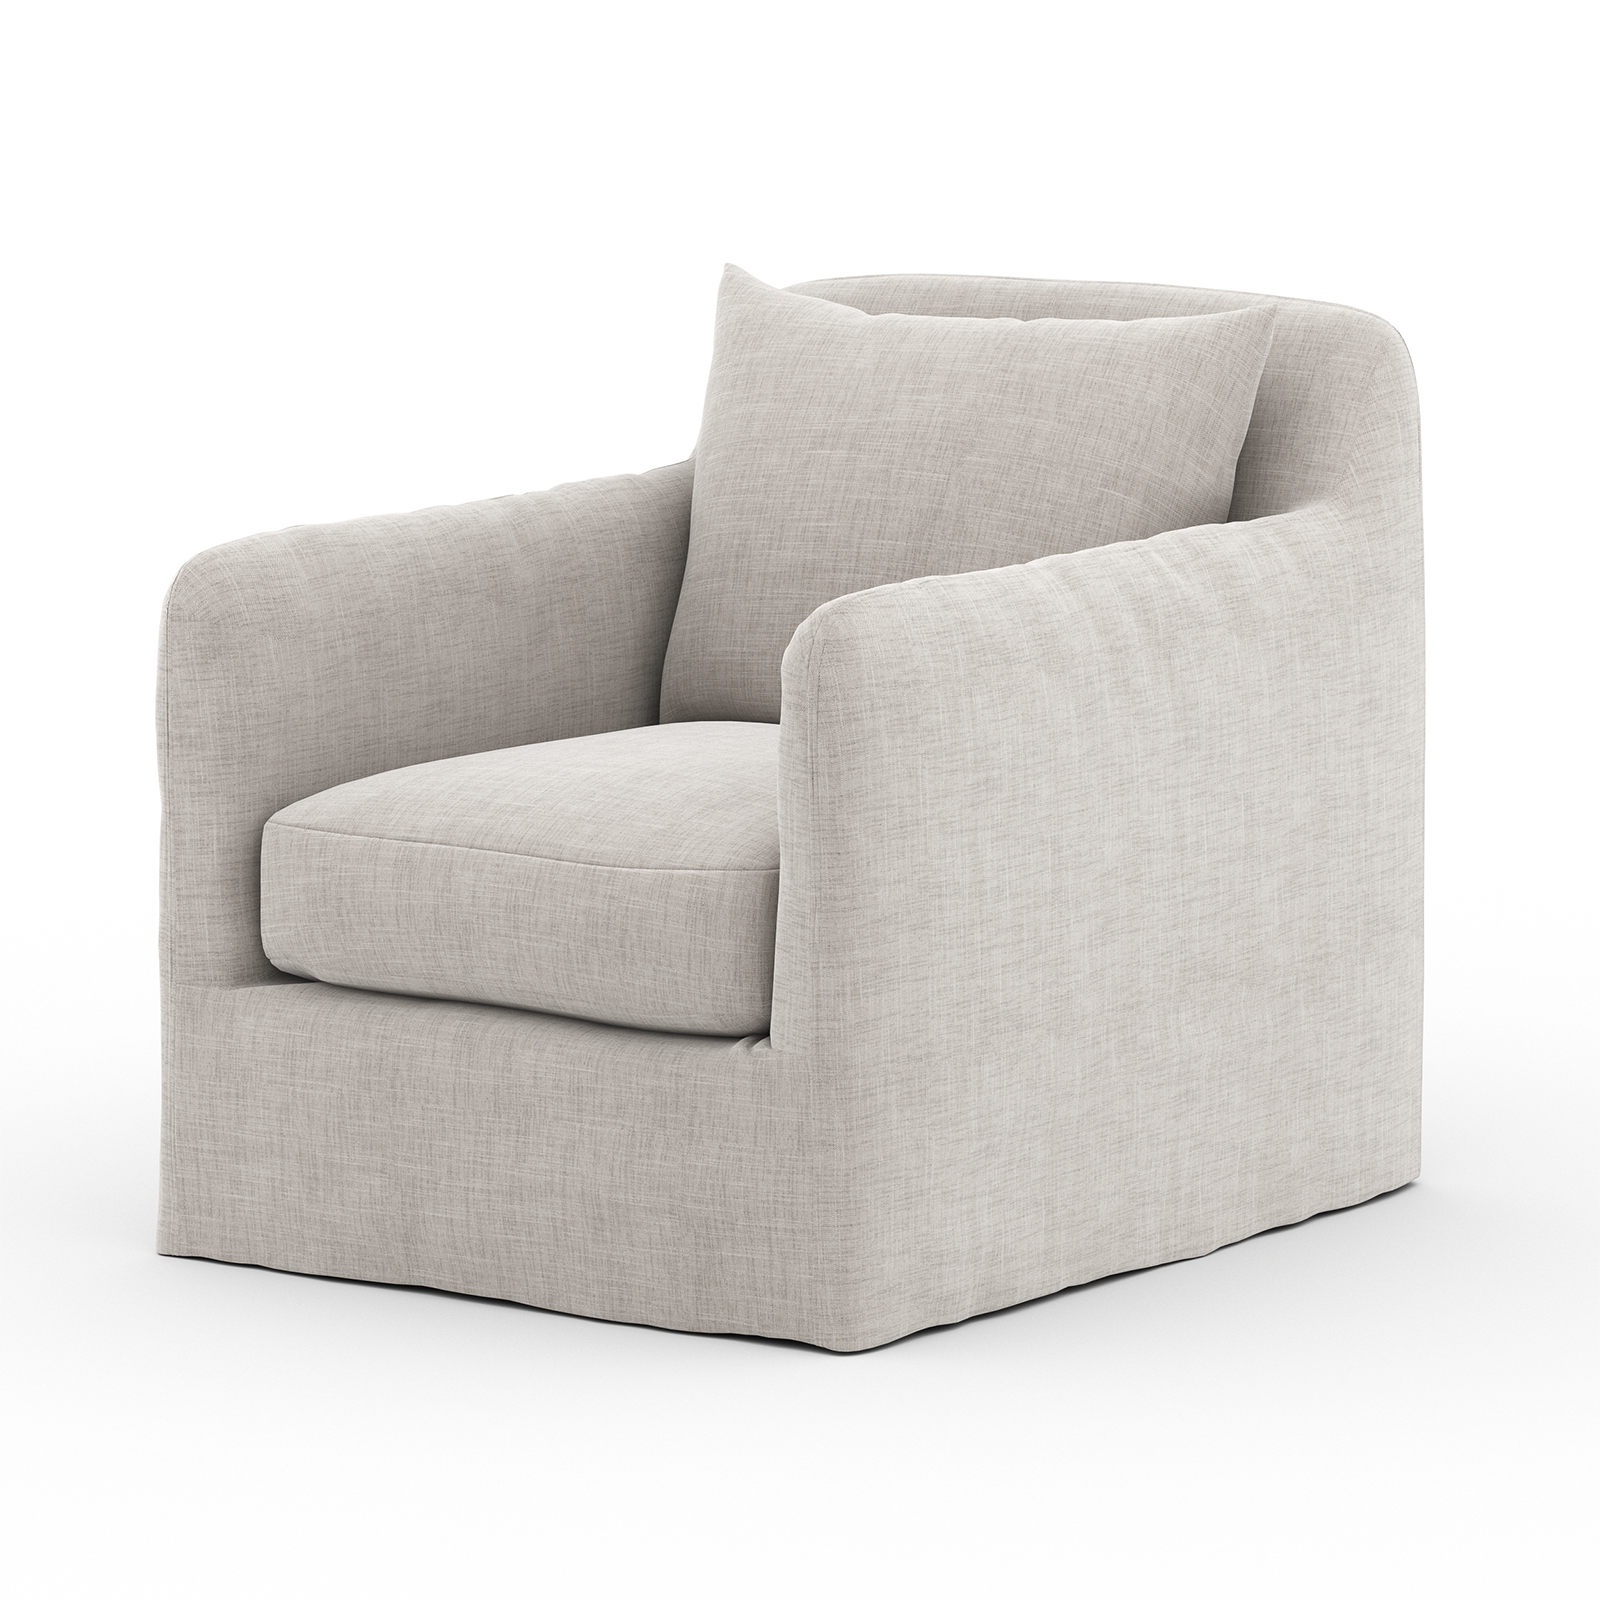 Dally Outdoor Swivel Chair